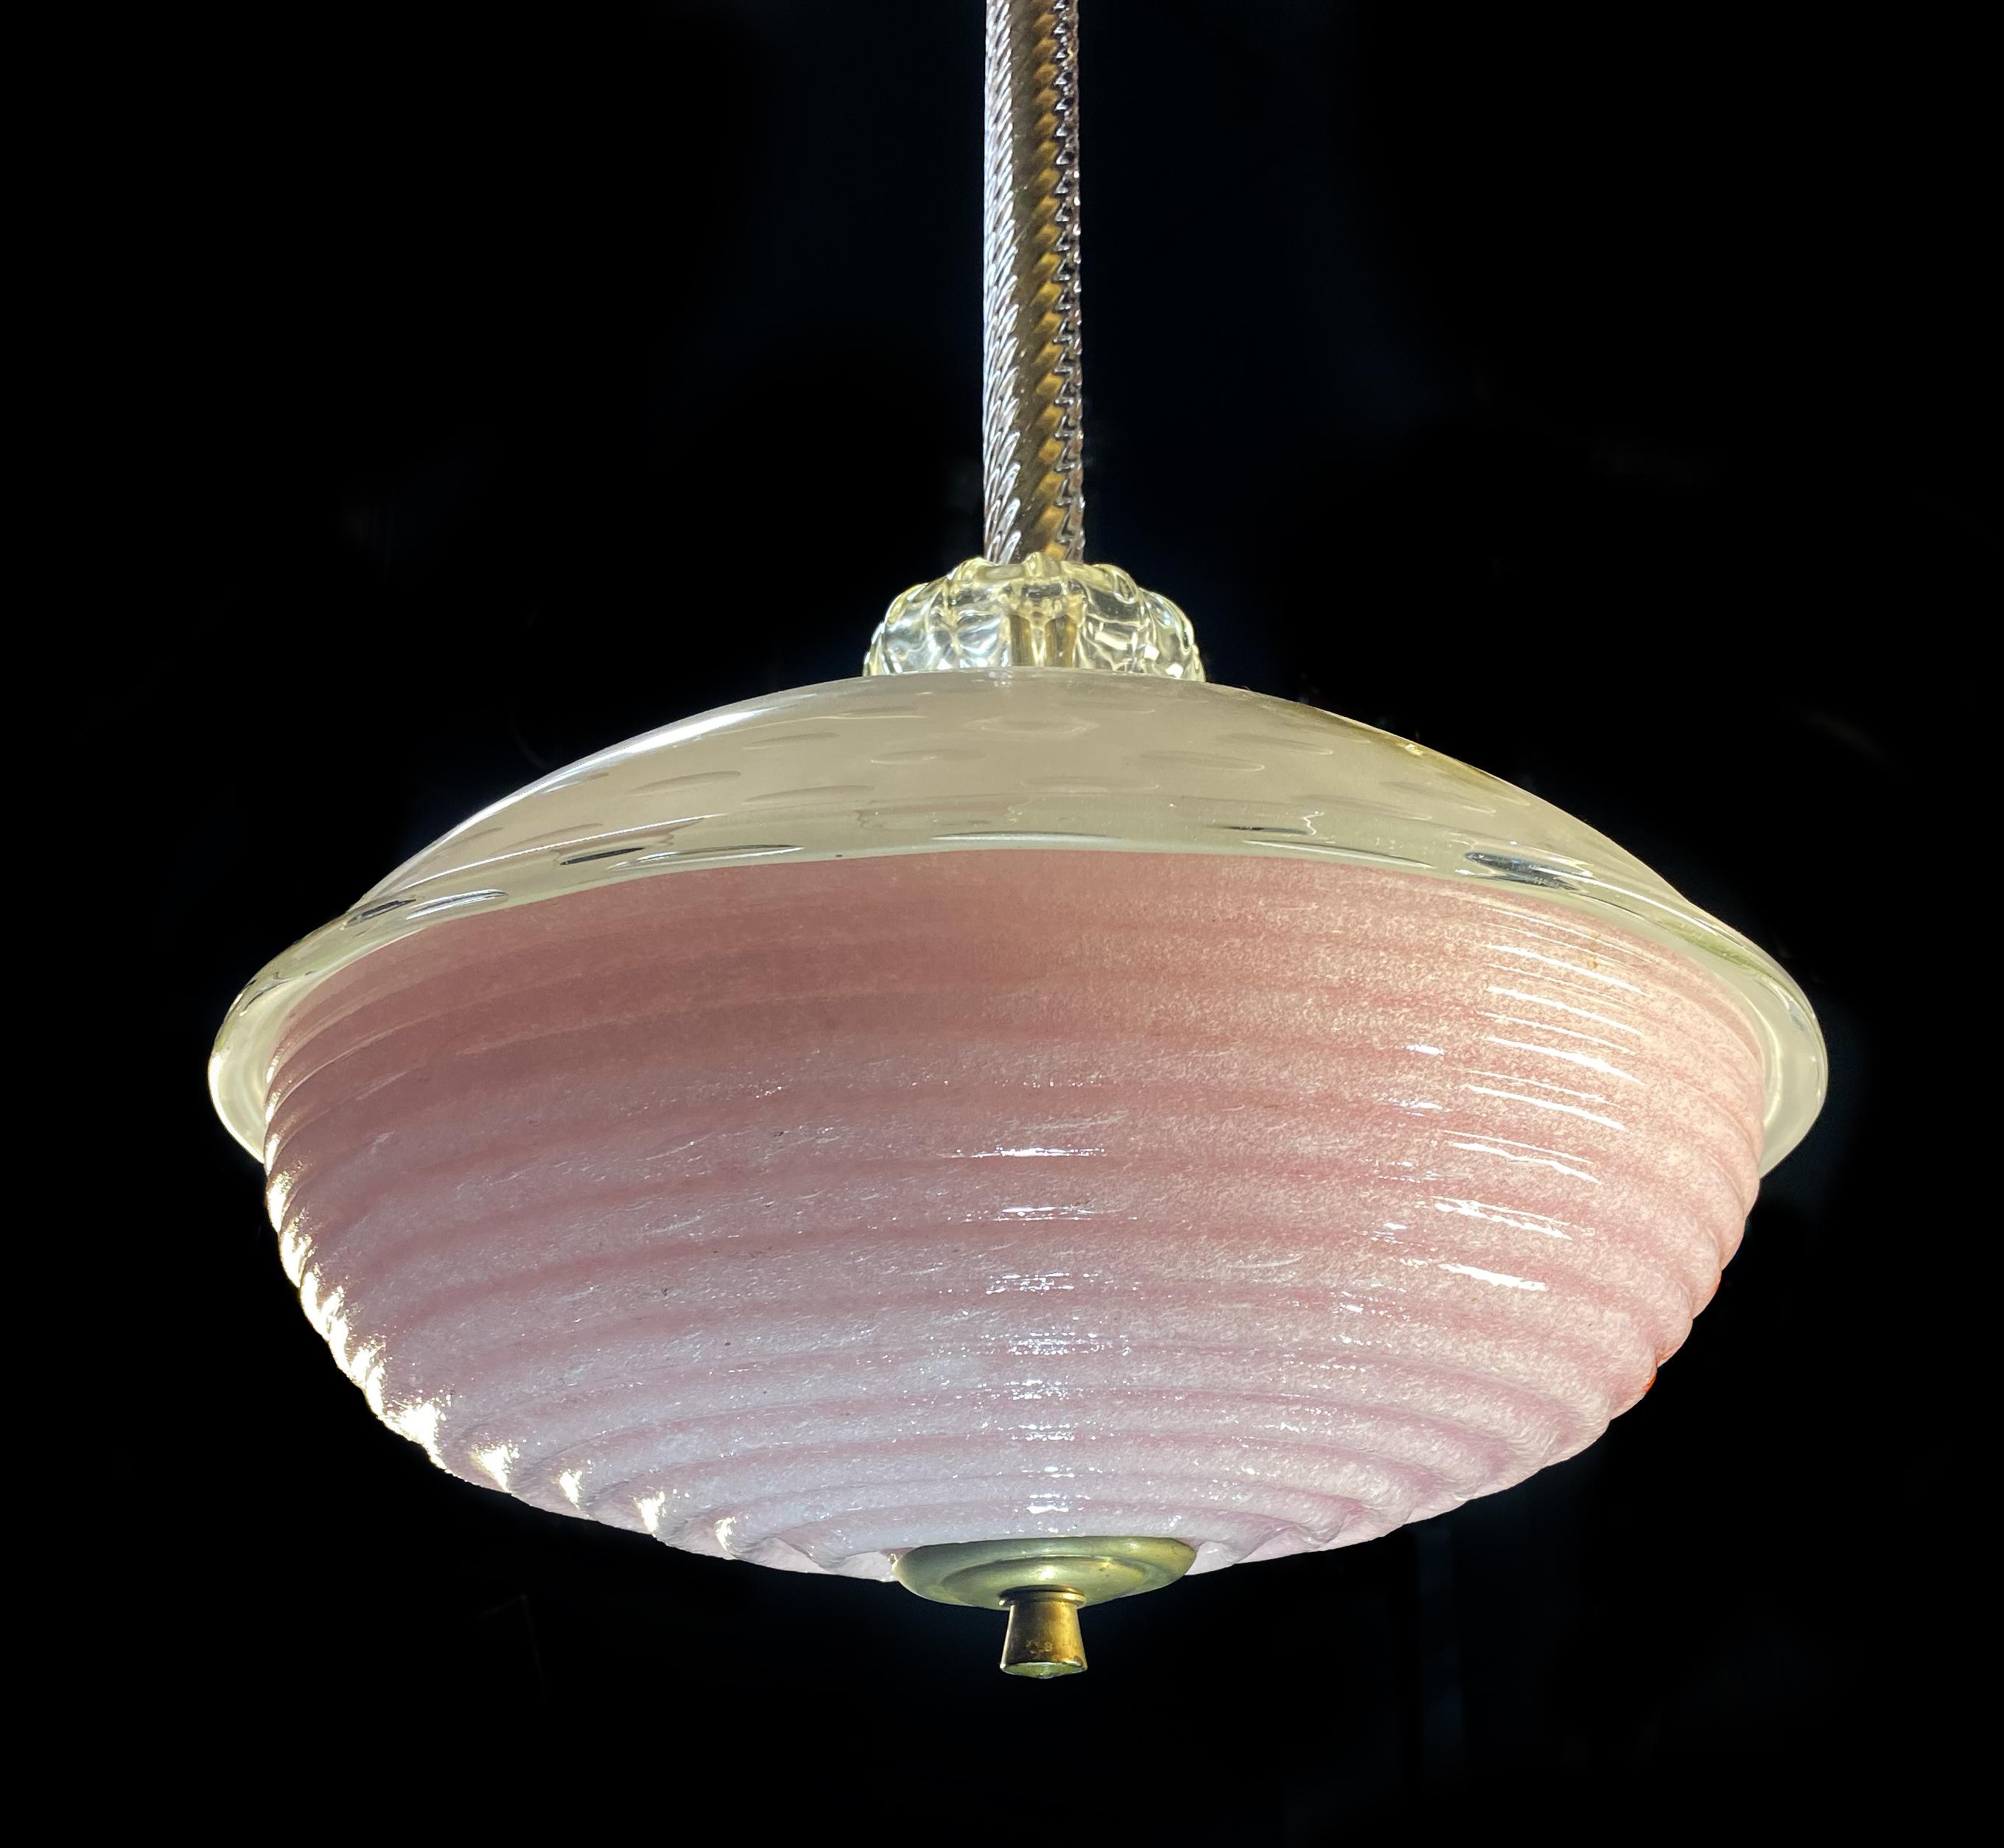 Italian Charming Pink Glass Lantern Chandelier by Barovier & Toso, Murano, 1940 For Sale